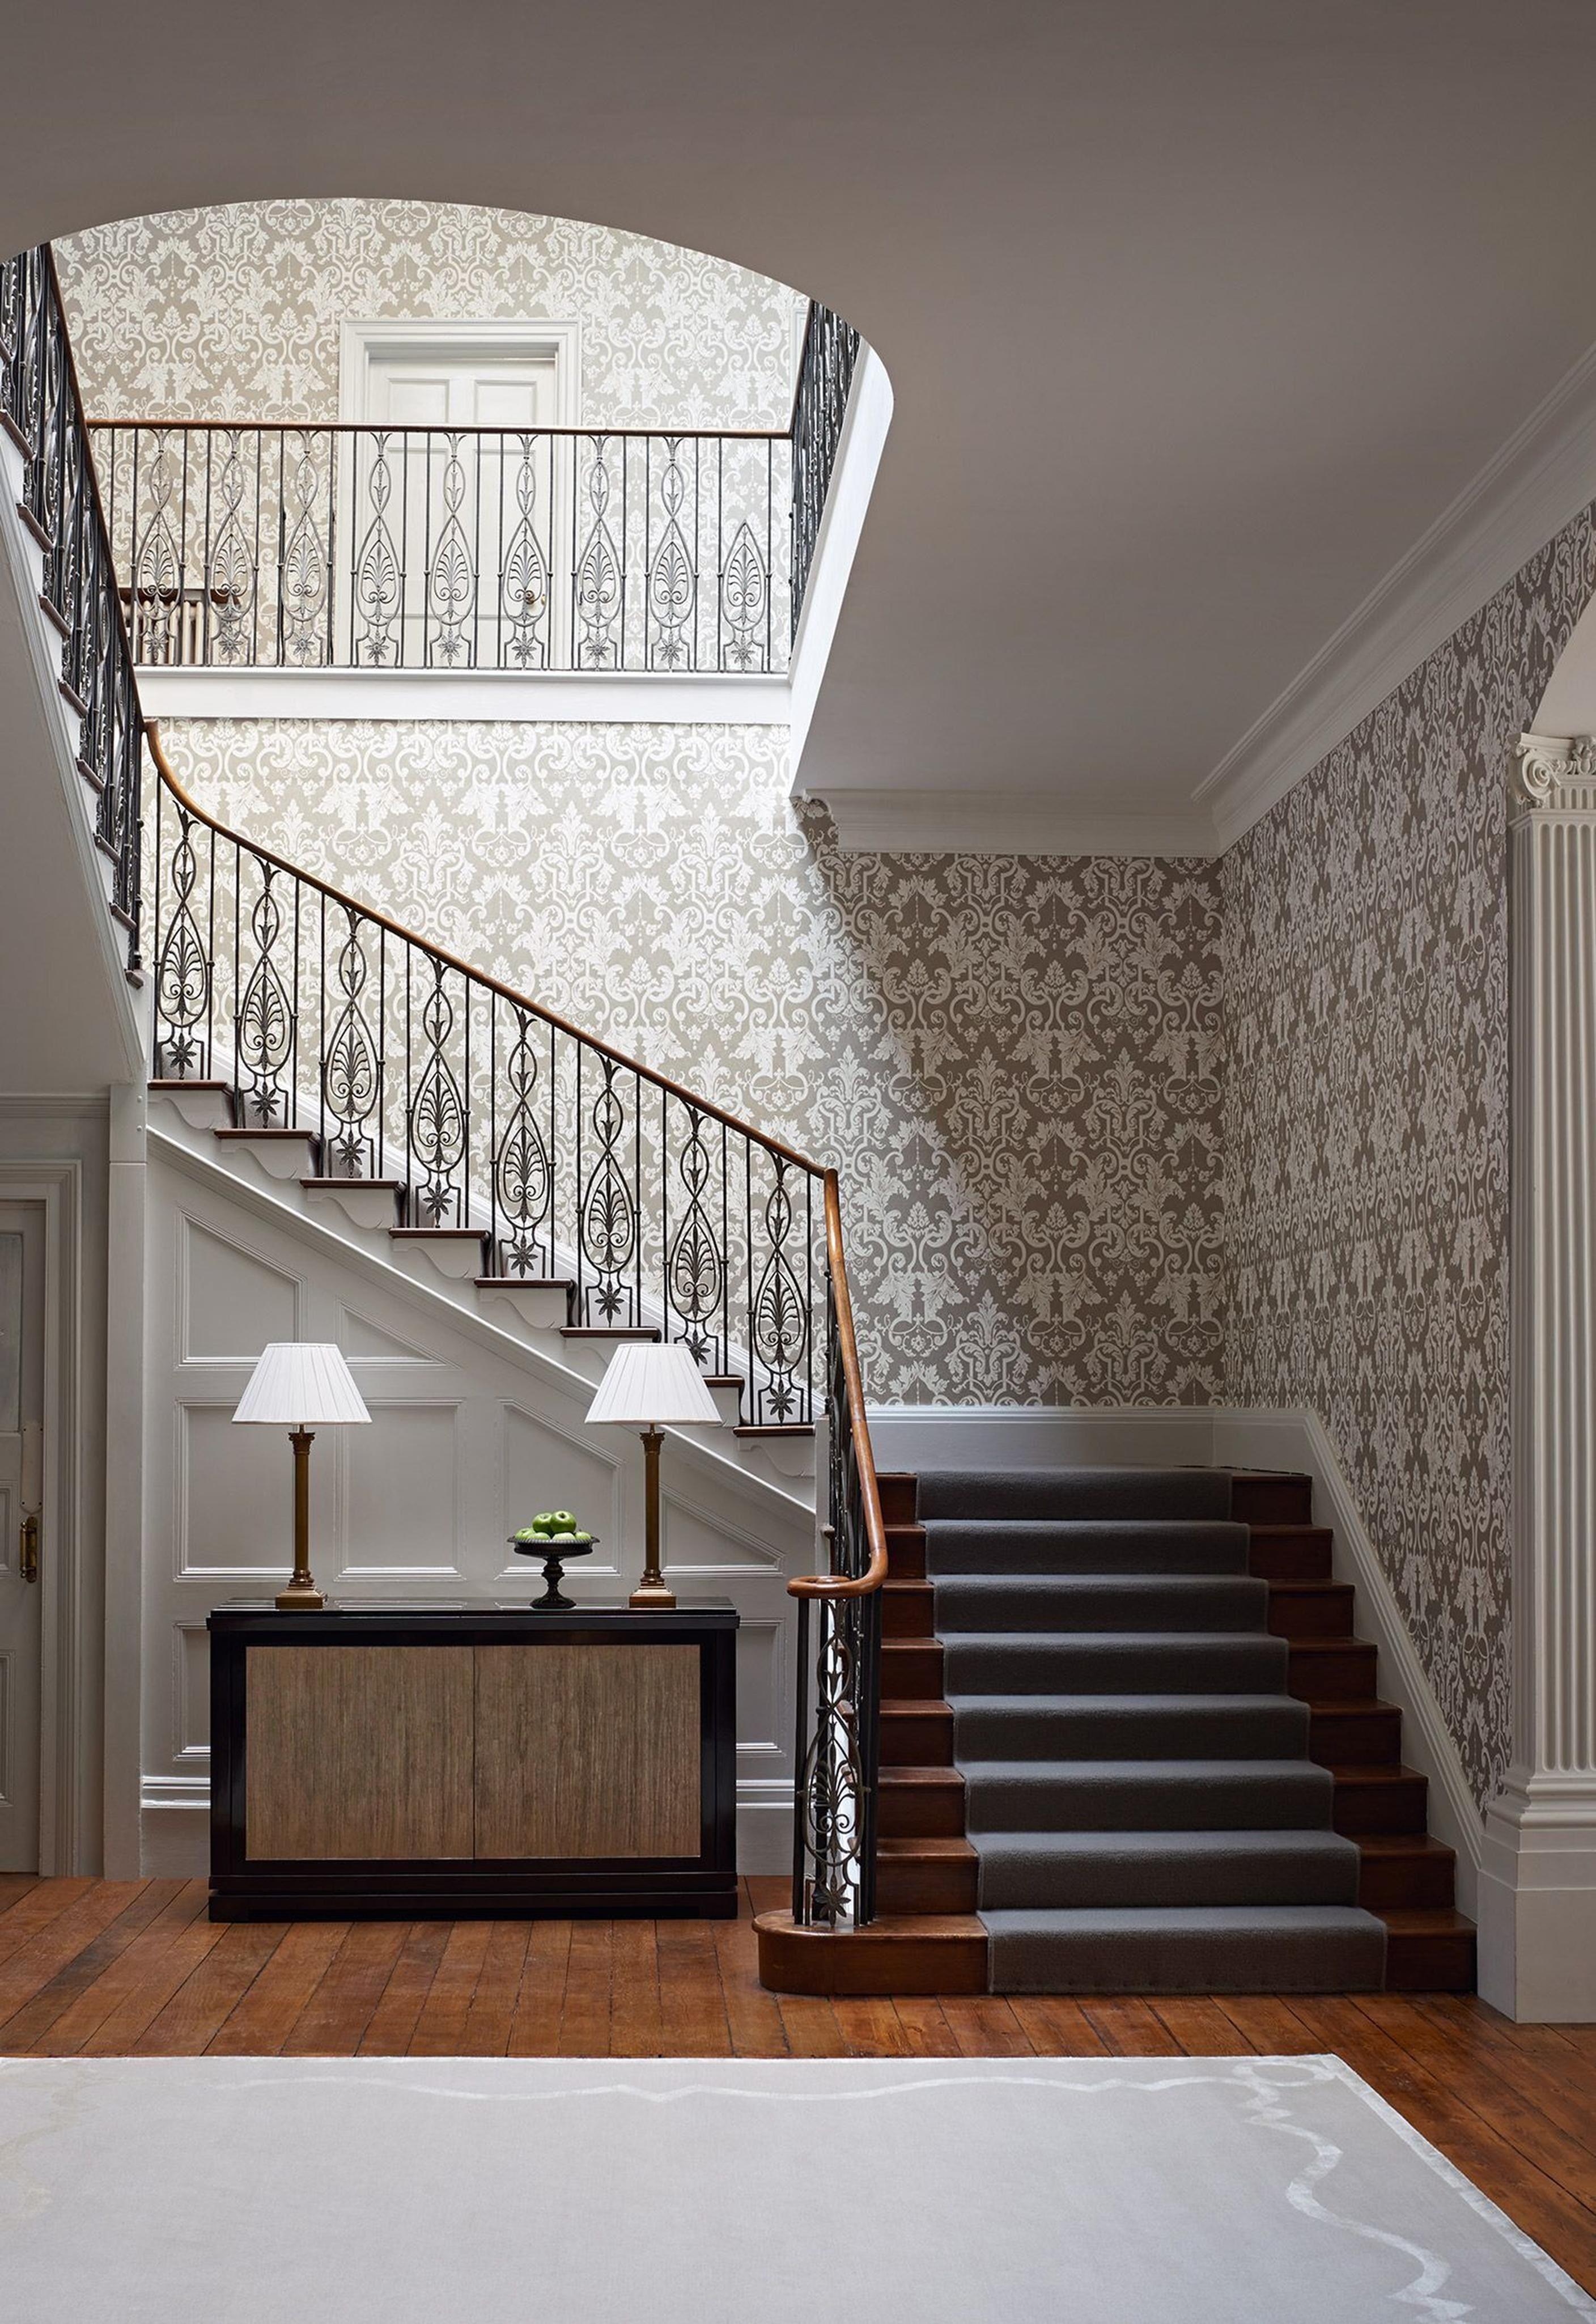 Stairs Wallpaper Ideas And How to Apply Them